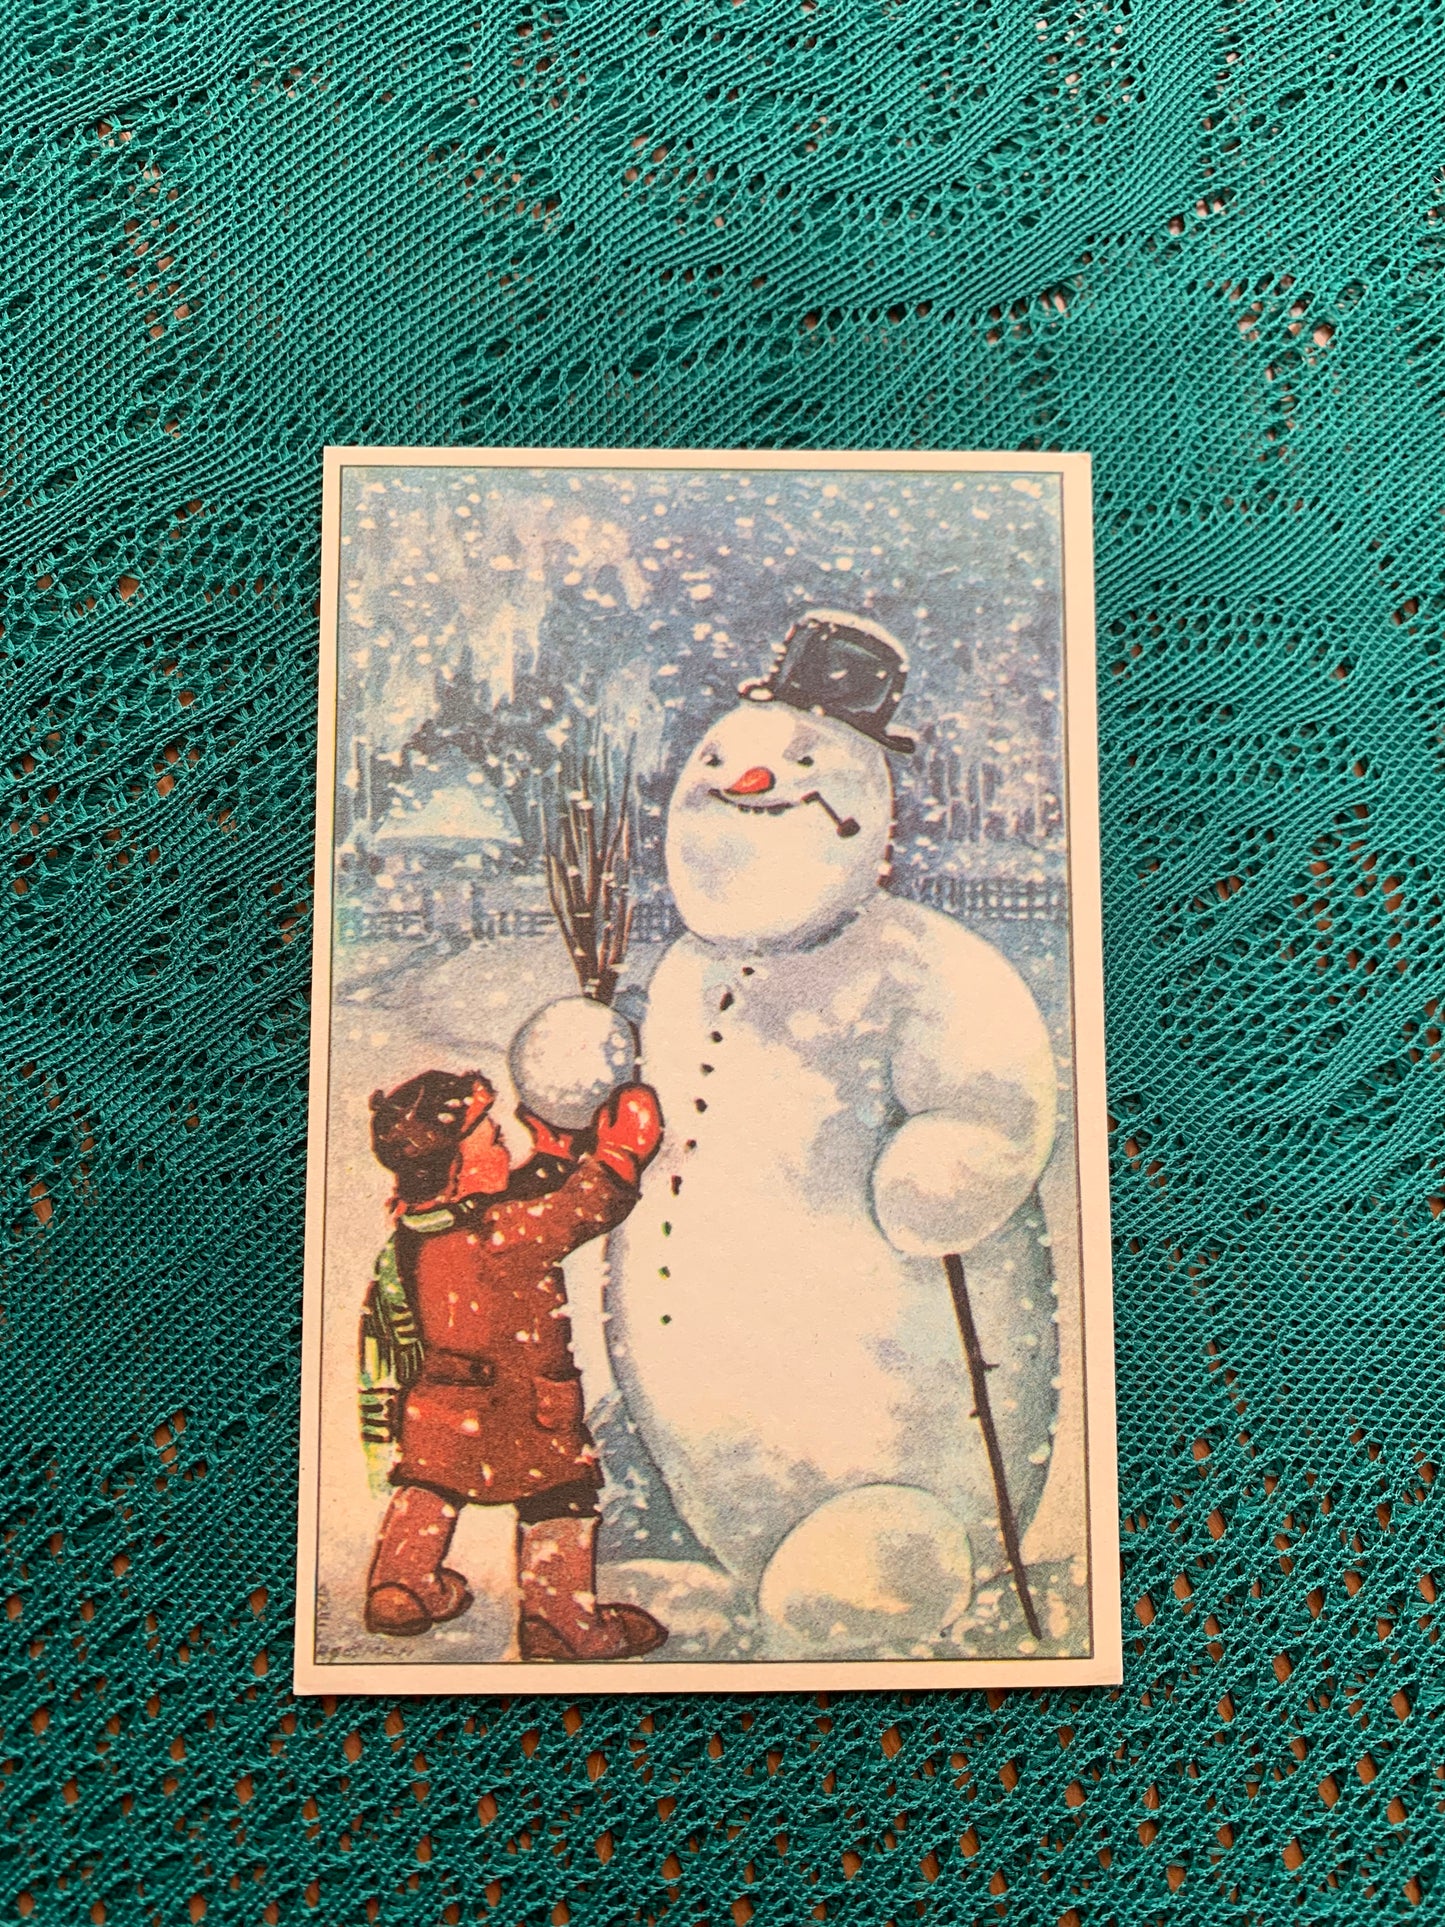 Estonian Christmas / New Year Greeting card - Reproduction from old postcard - Boy and Snowman - 1988 - unused